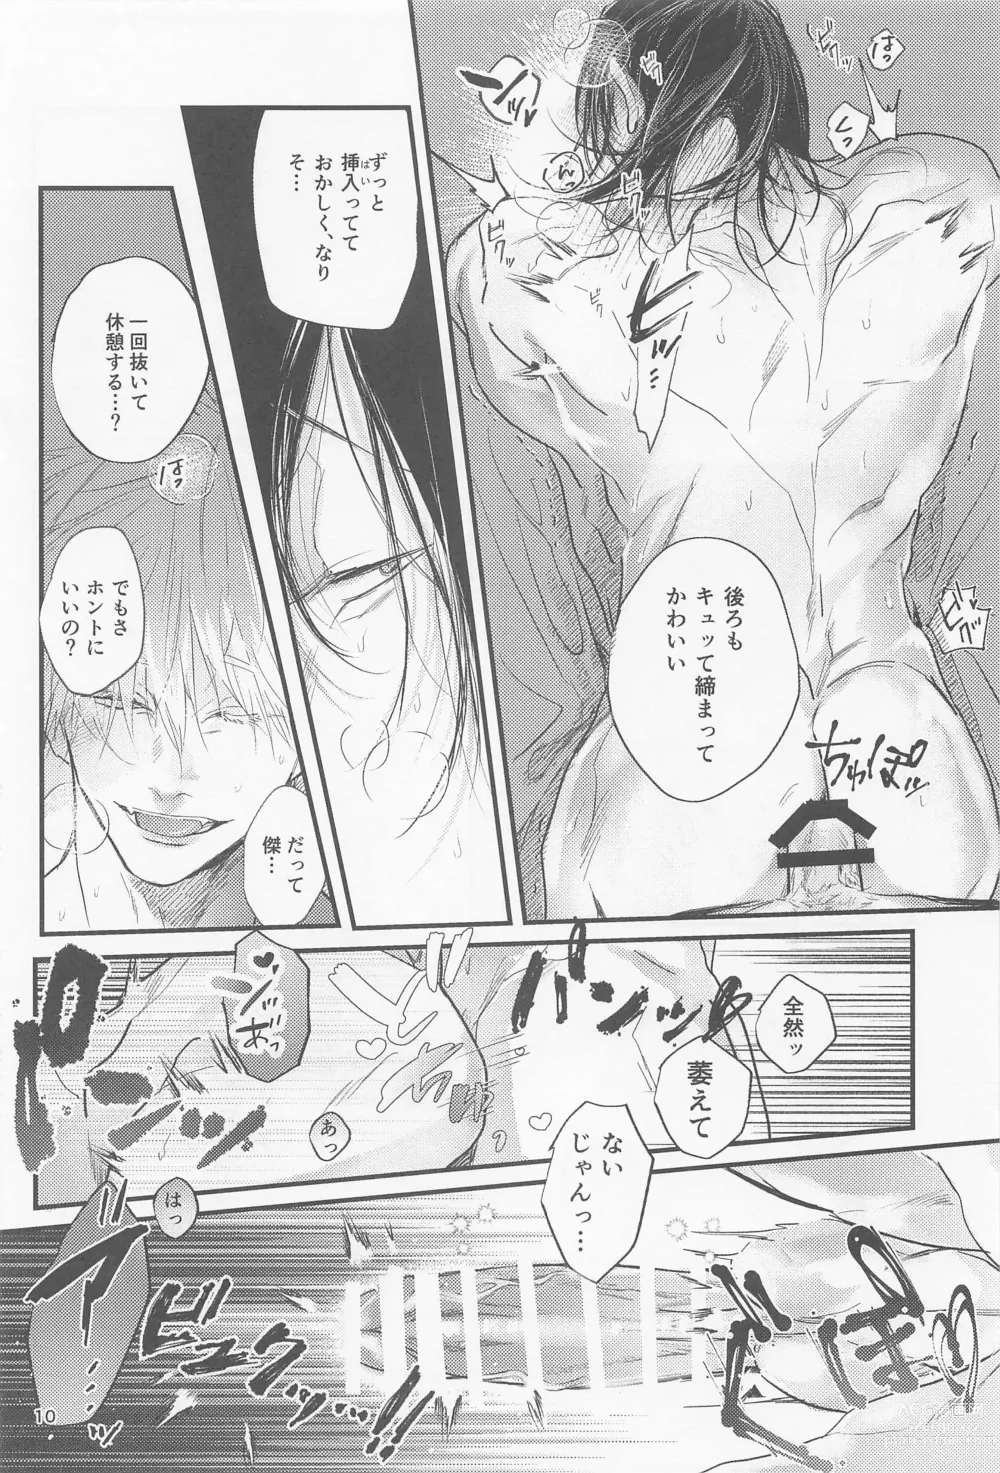 Page 9 of doujinshi PRIVATE